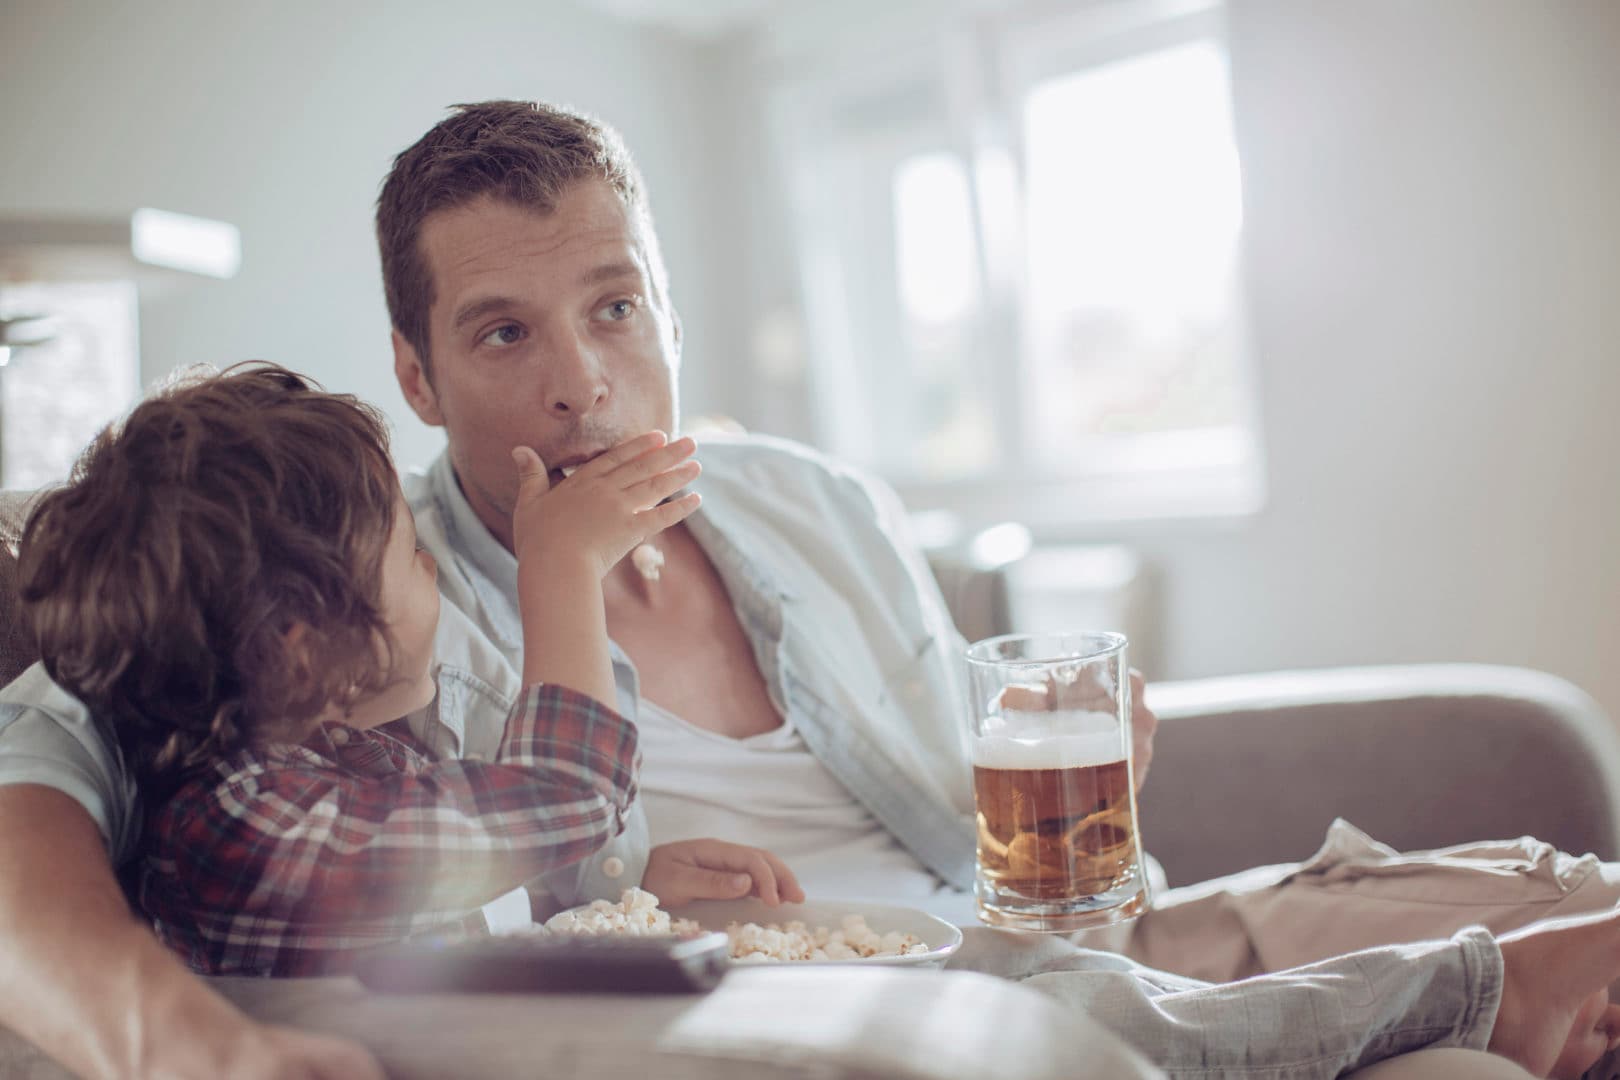 Whether it’s mom or dad, parents who drink too much can affect kids